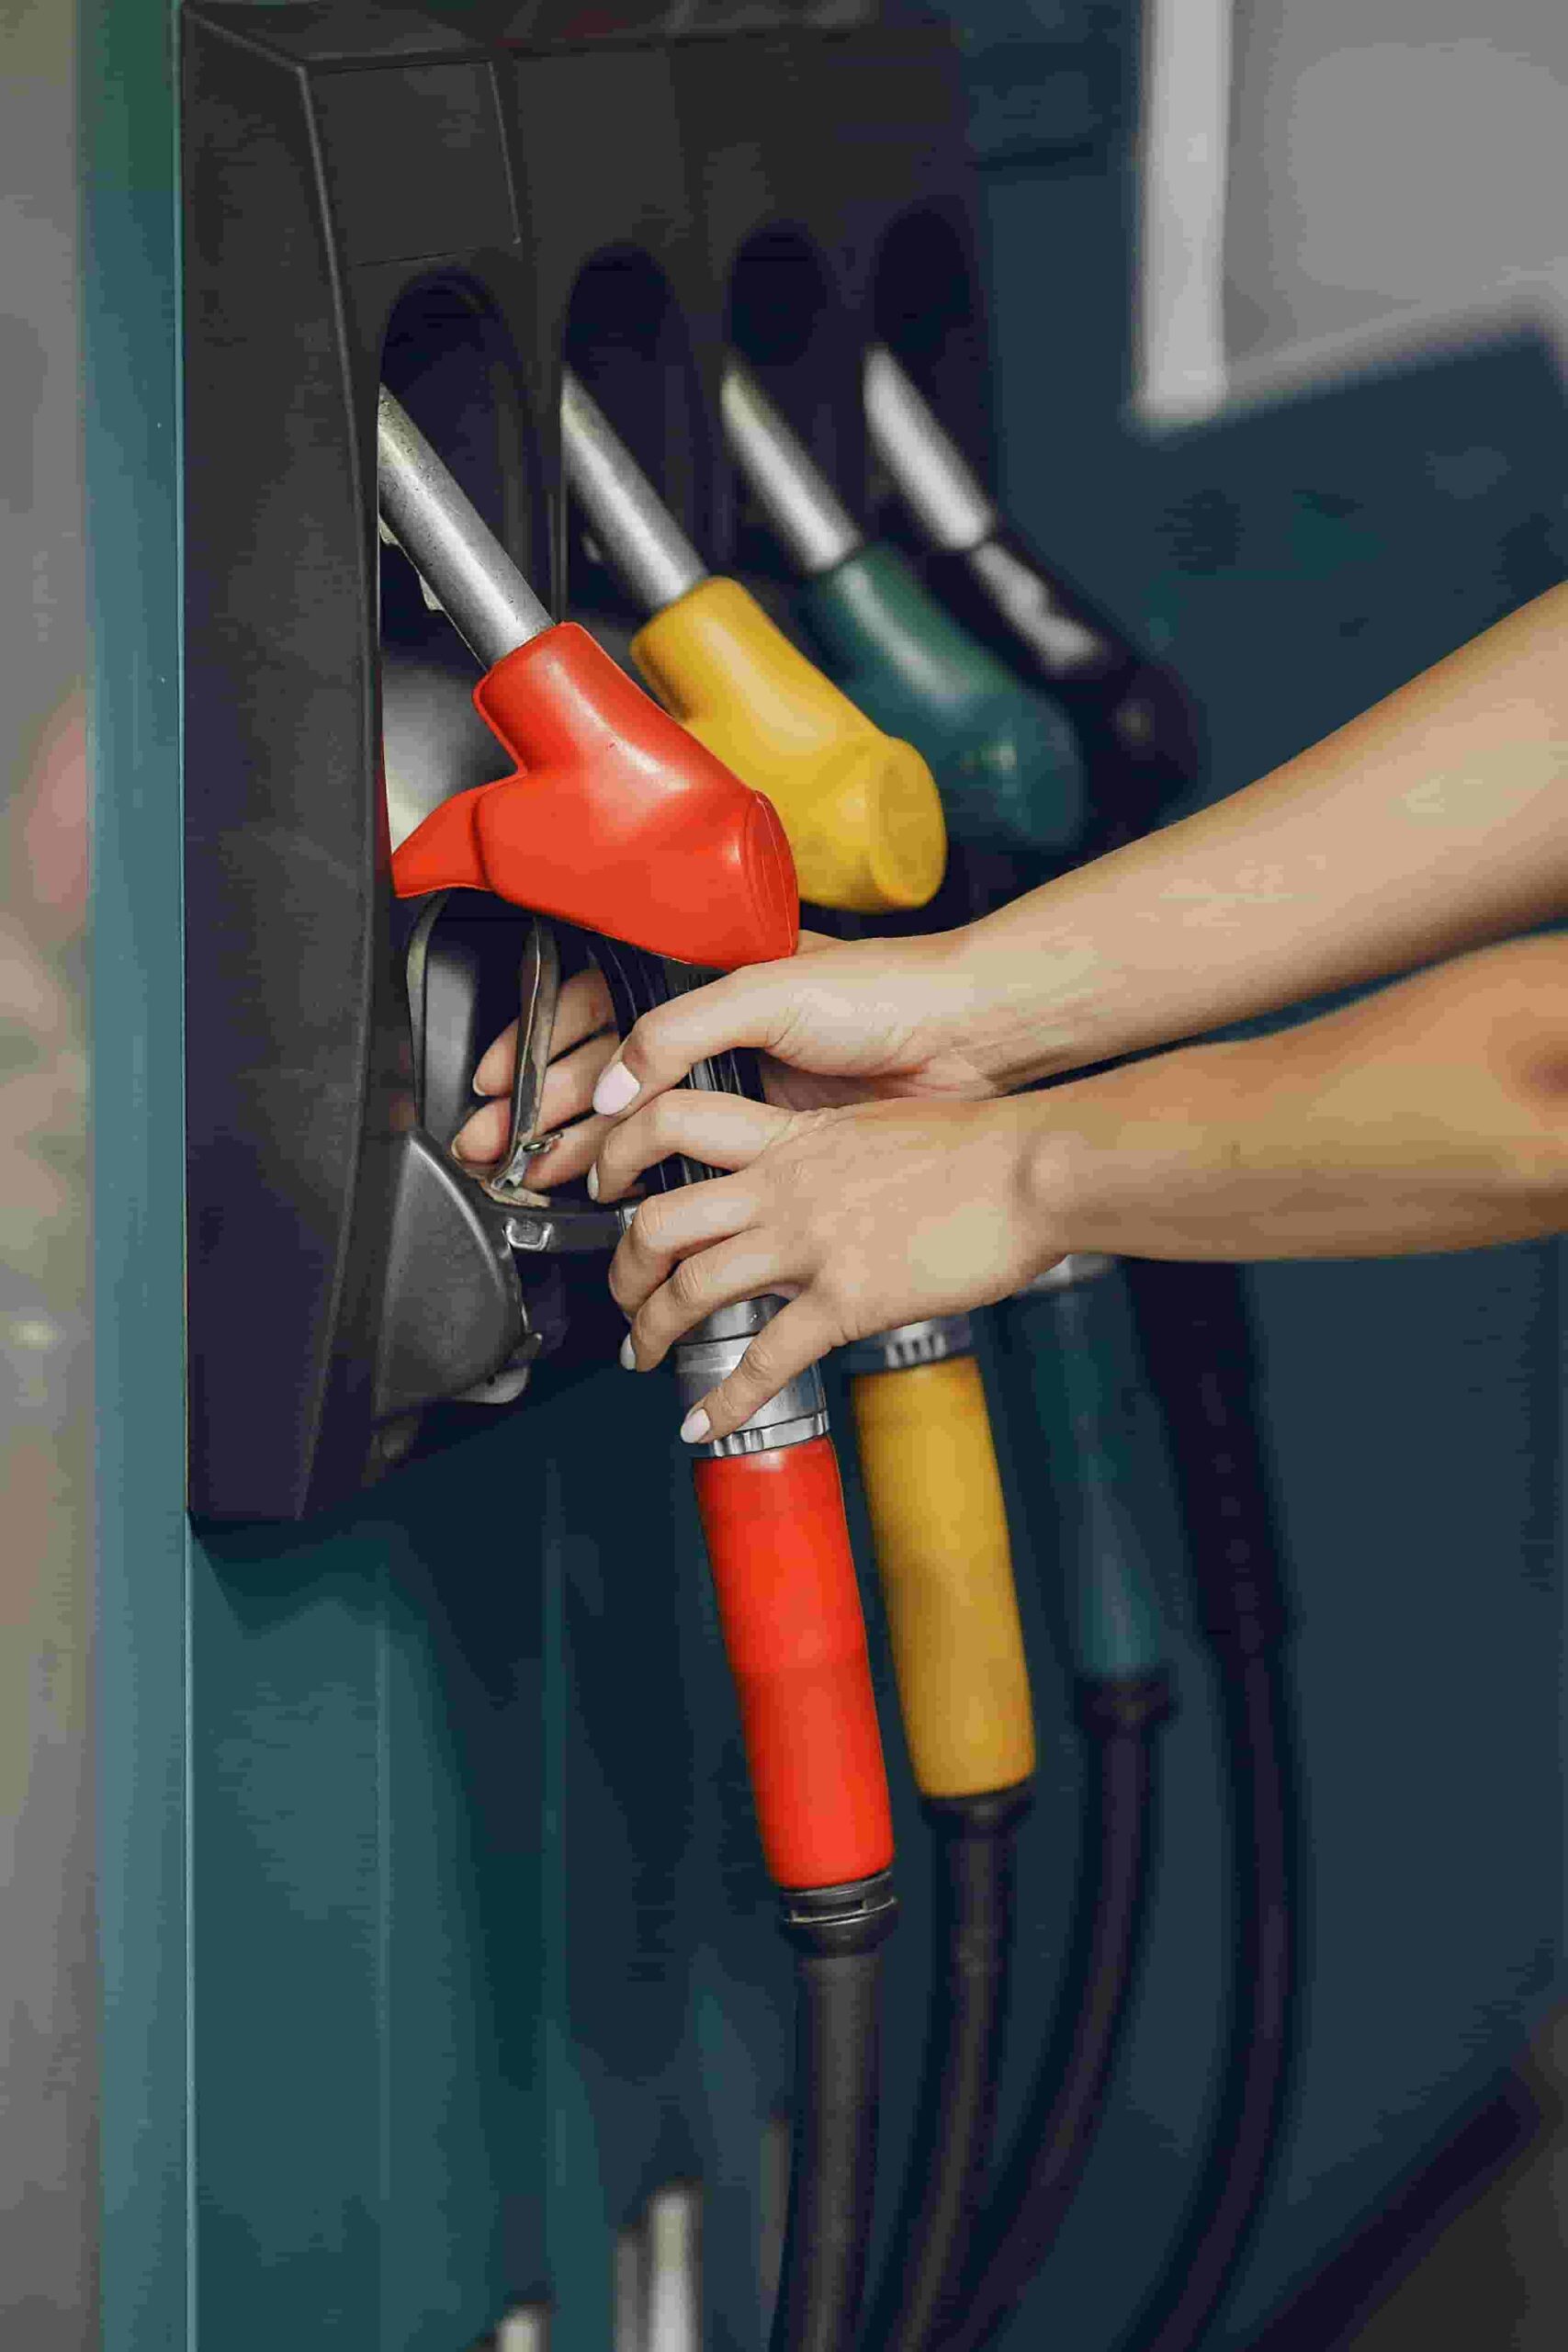 petrol price will be decreased from 15 June